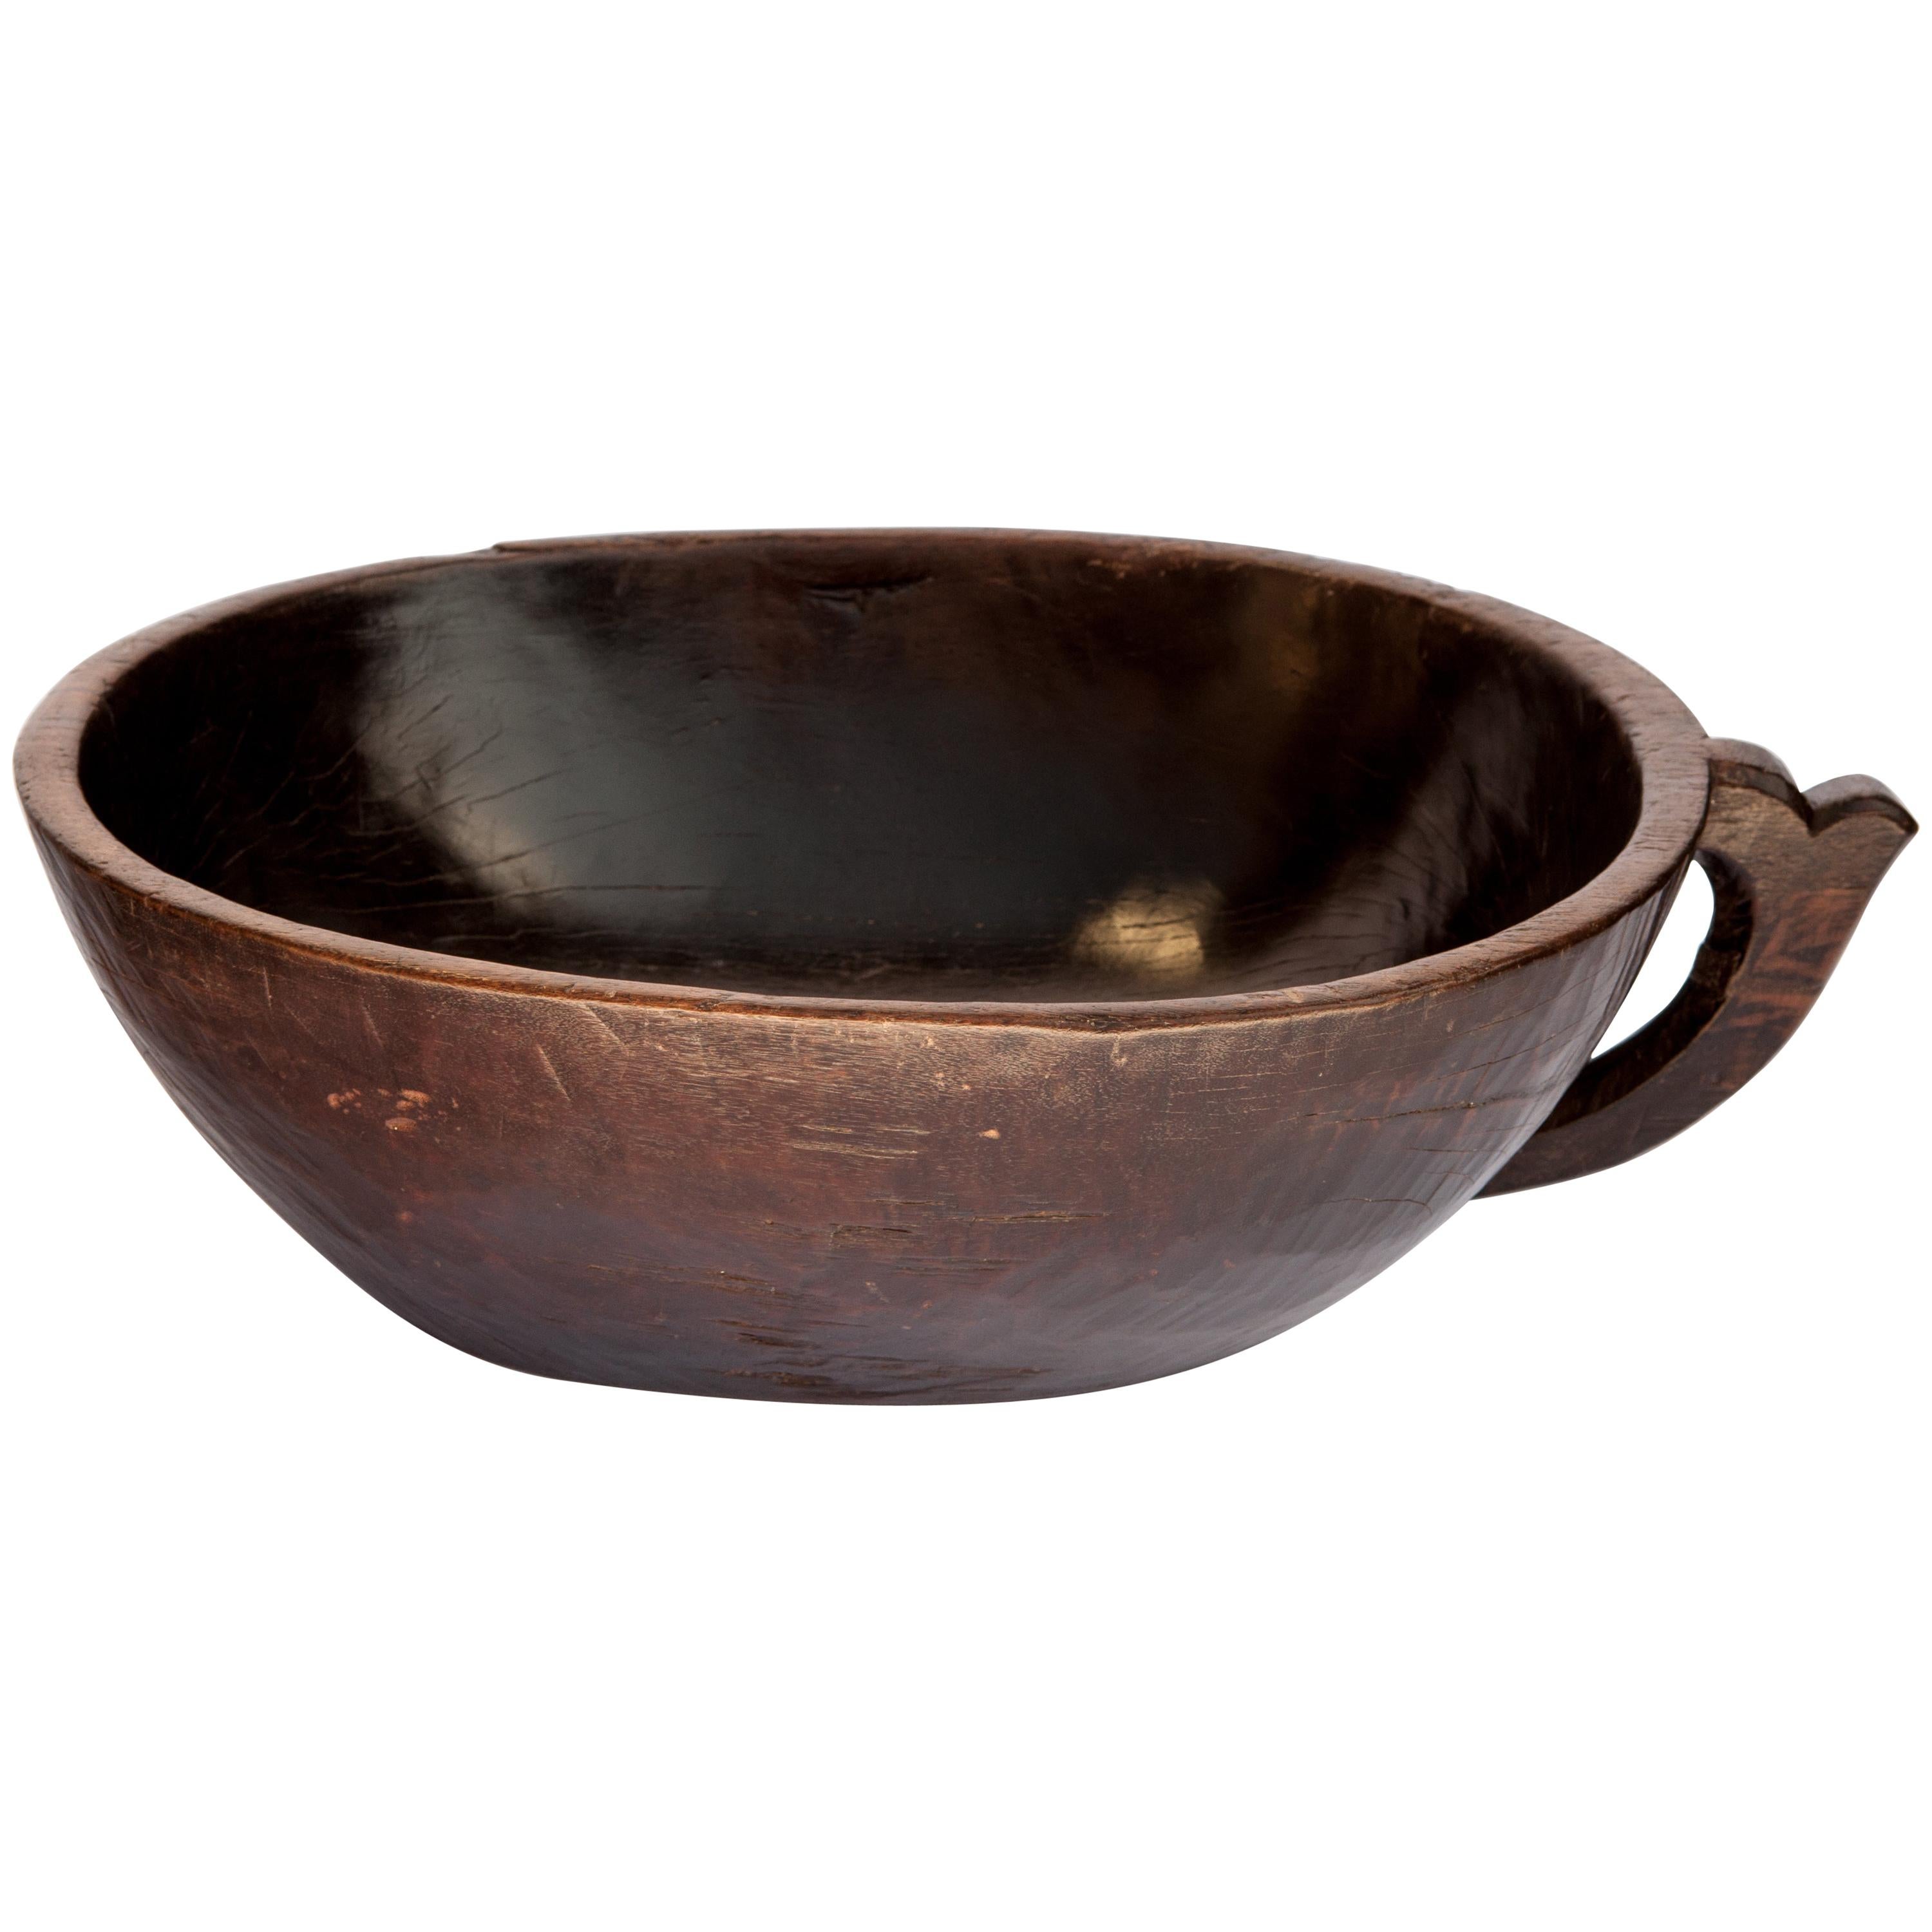 Vintage hand hewn wooden bowl with handle from Sulawesi, Indonesia, mid-20th century.
This wooden bowl from the mountains of Sulawesi was fashioned by hand from a single piece of wood. The pronounced oblong shape of this piece is somewhat unusual.